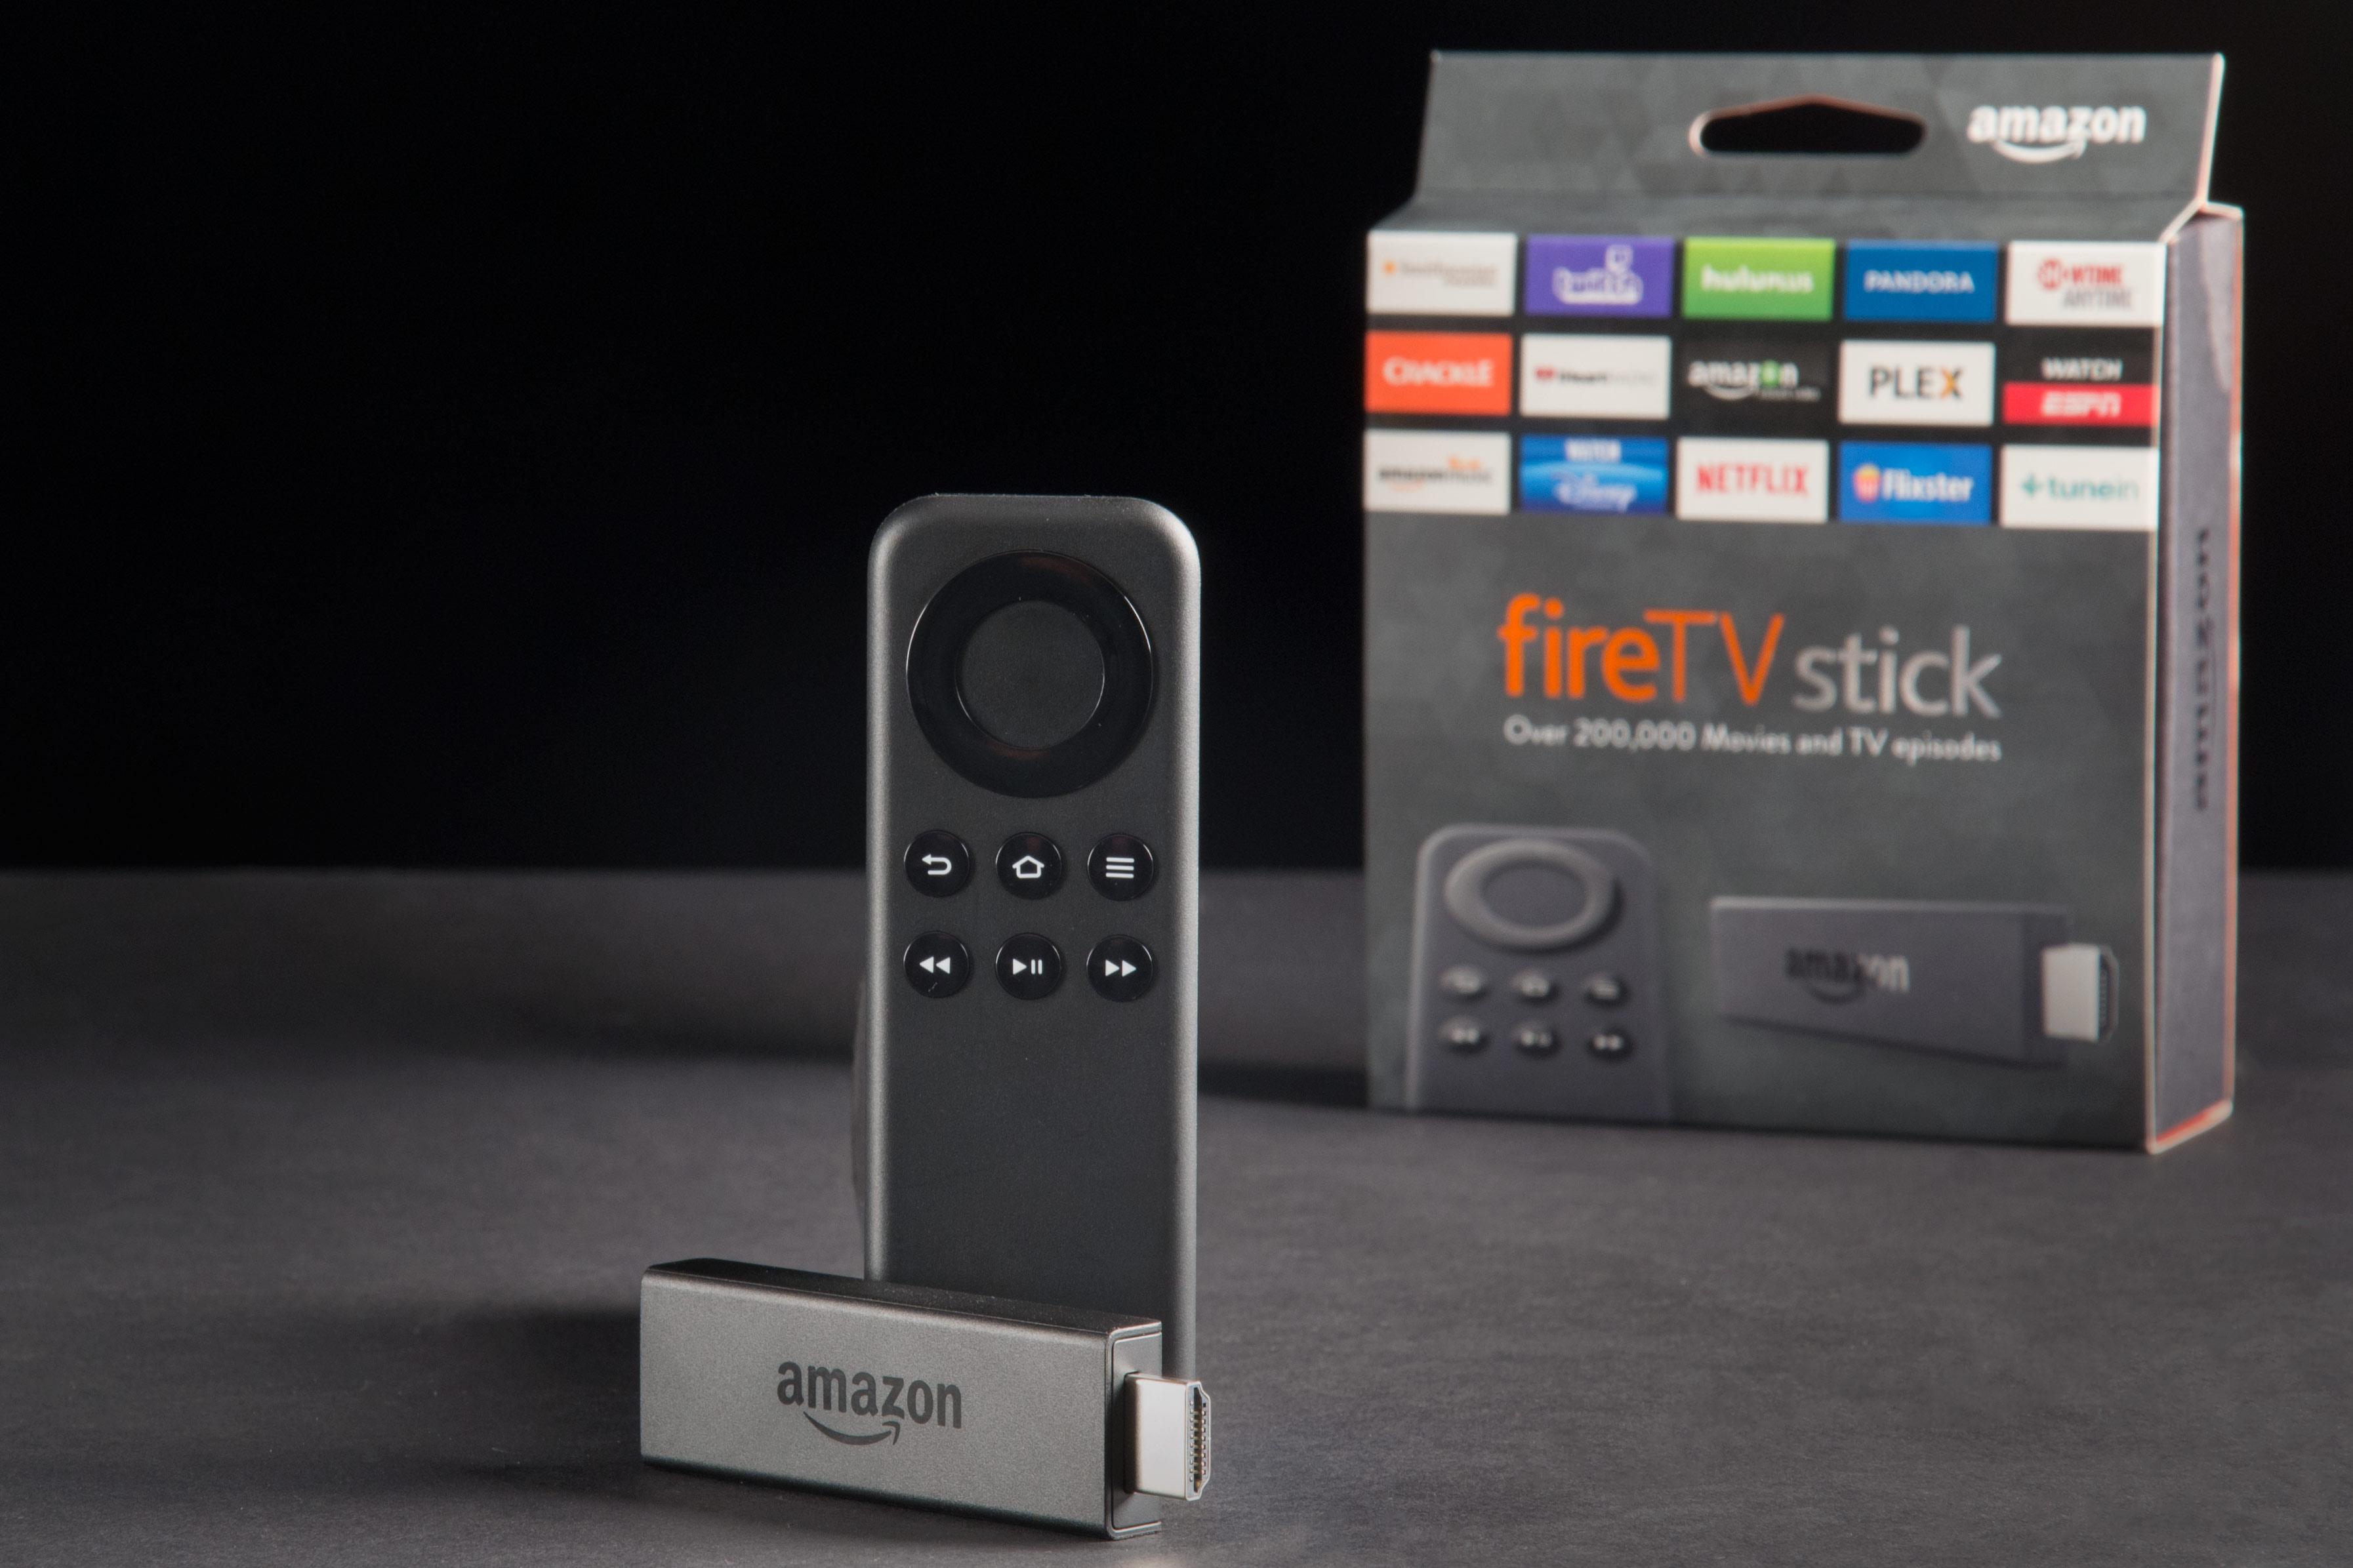 Amazon Fire TV Stick with Alexa Voice Remote - digital video streaming player